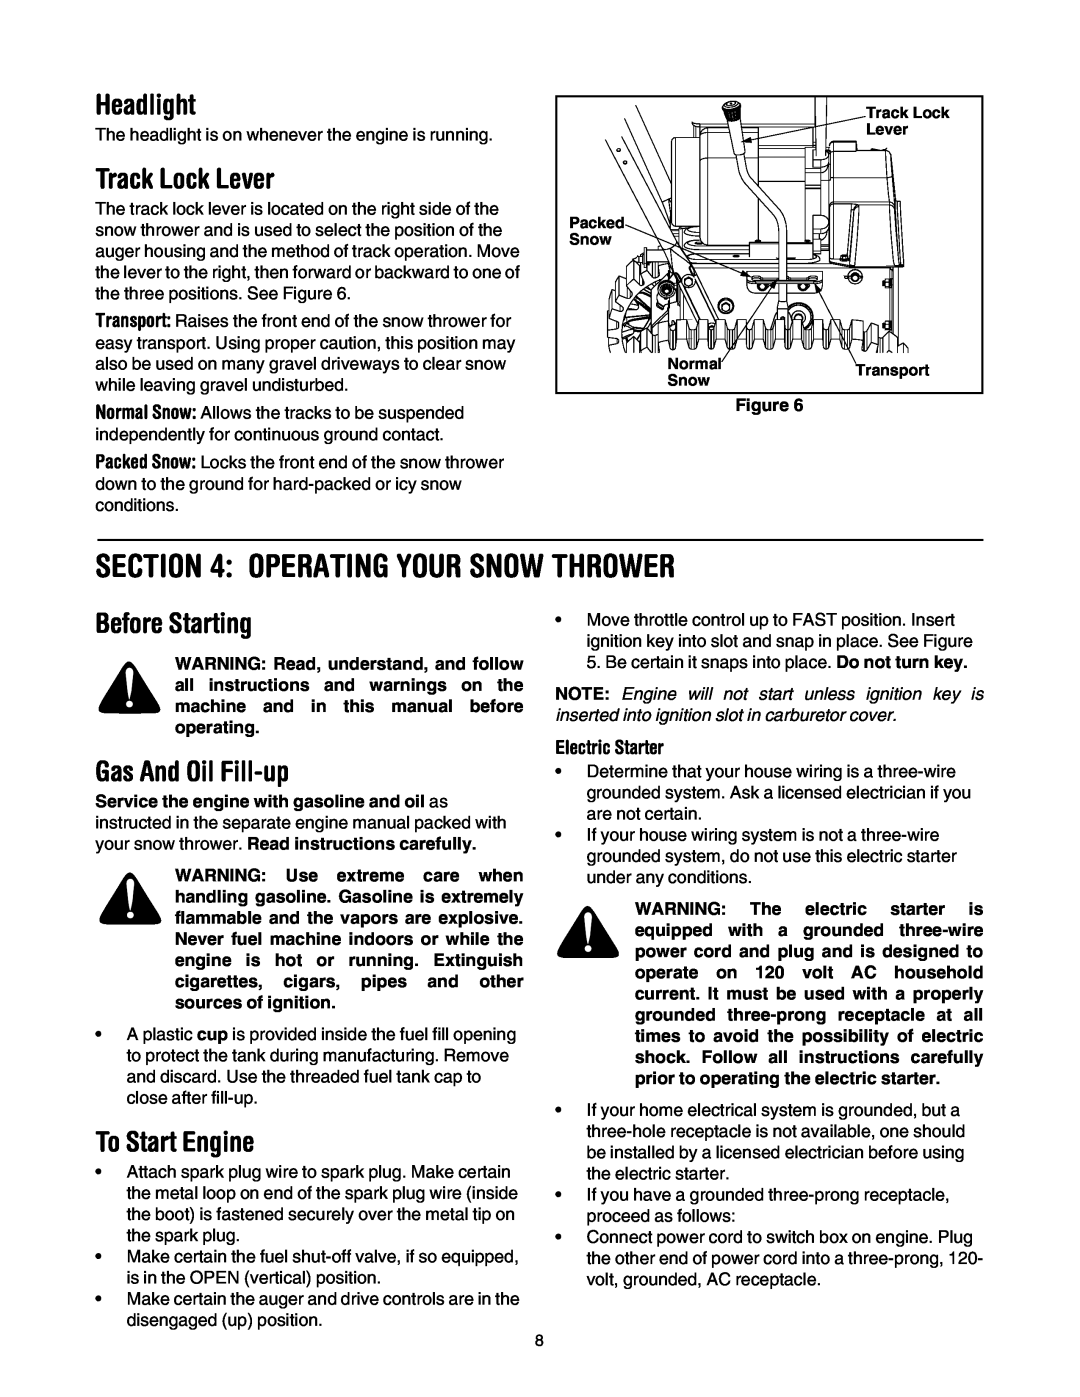 Troy-Bilt 1130, 1028 manual Operating Your Snow Thrower, Headlight, Track Lock Lever, Before Starting, Gas And Oil Fill-up 